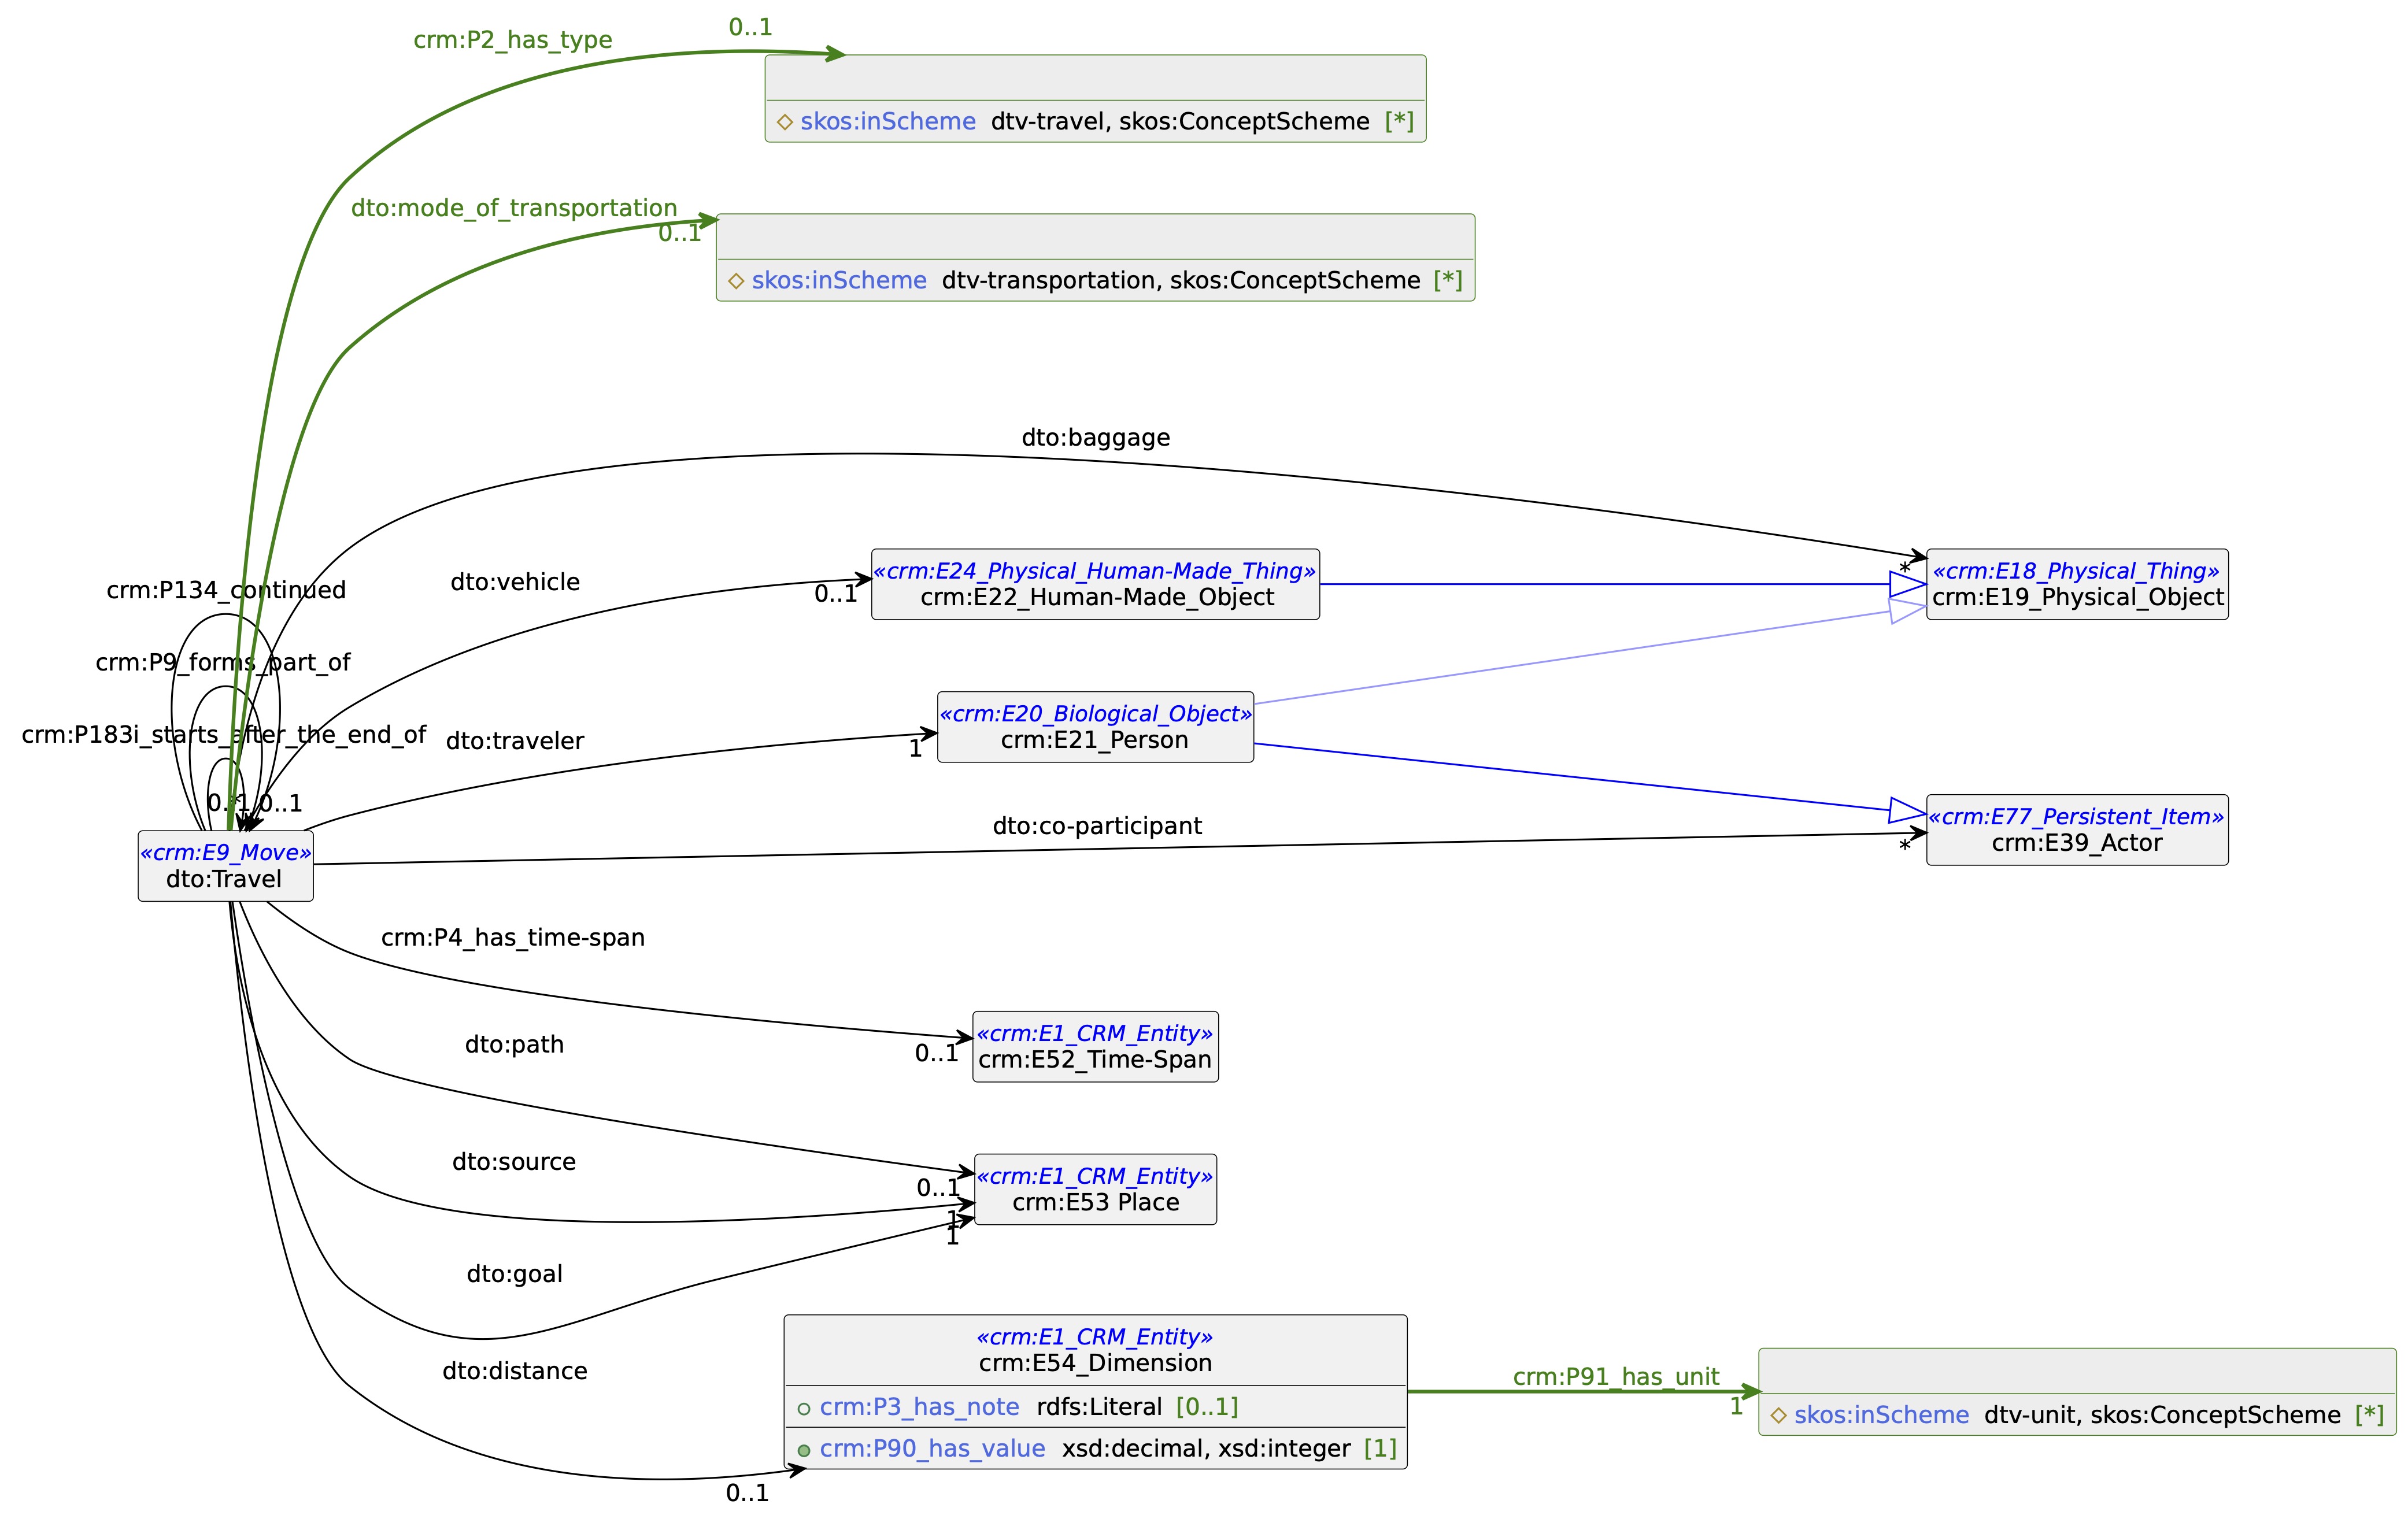 A UML-like class diagram showing properties and relationships between concepts.